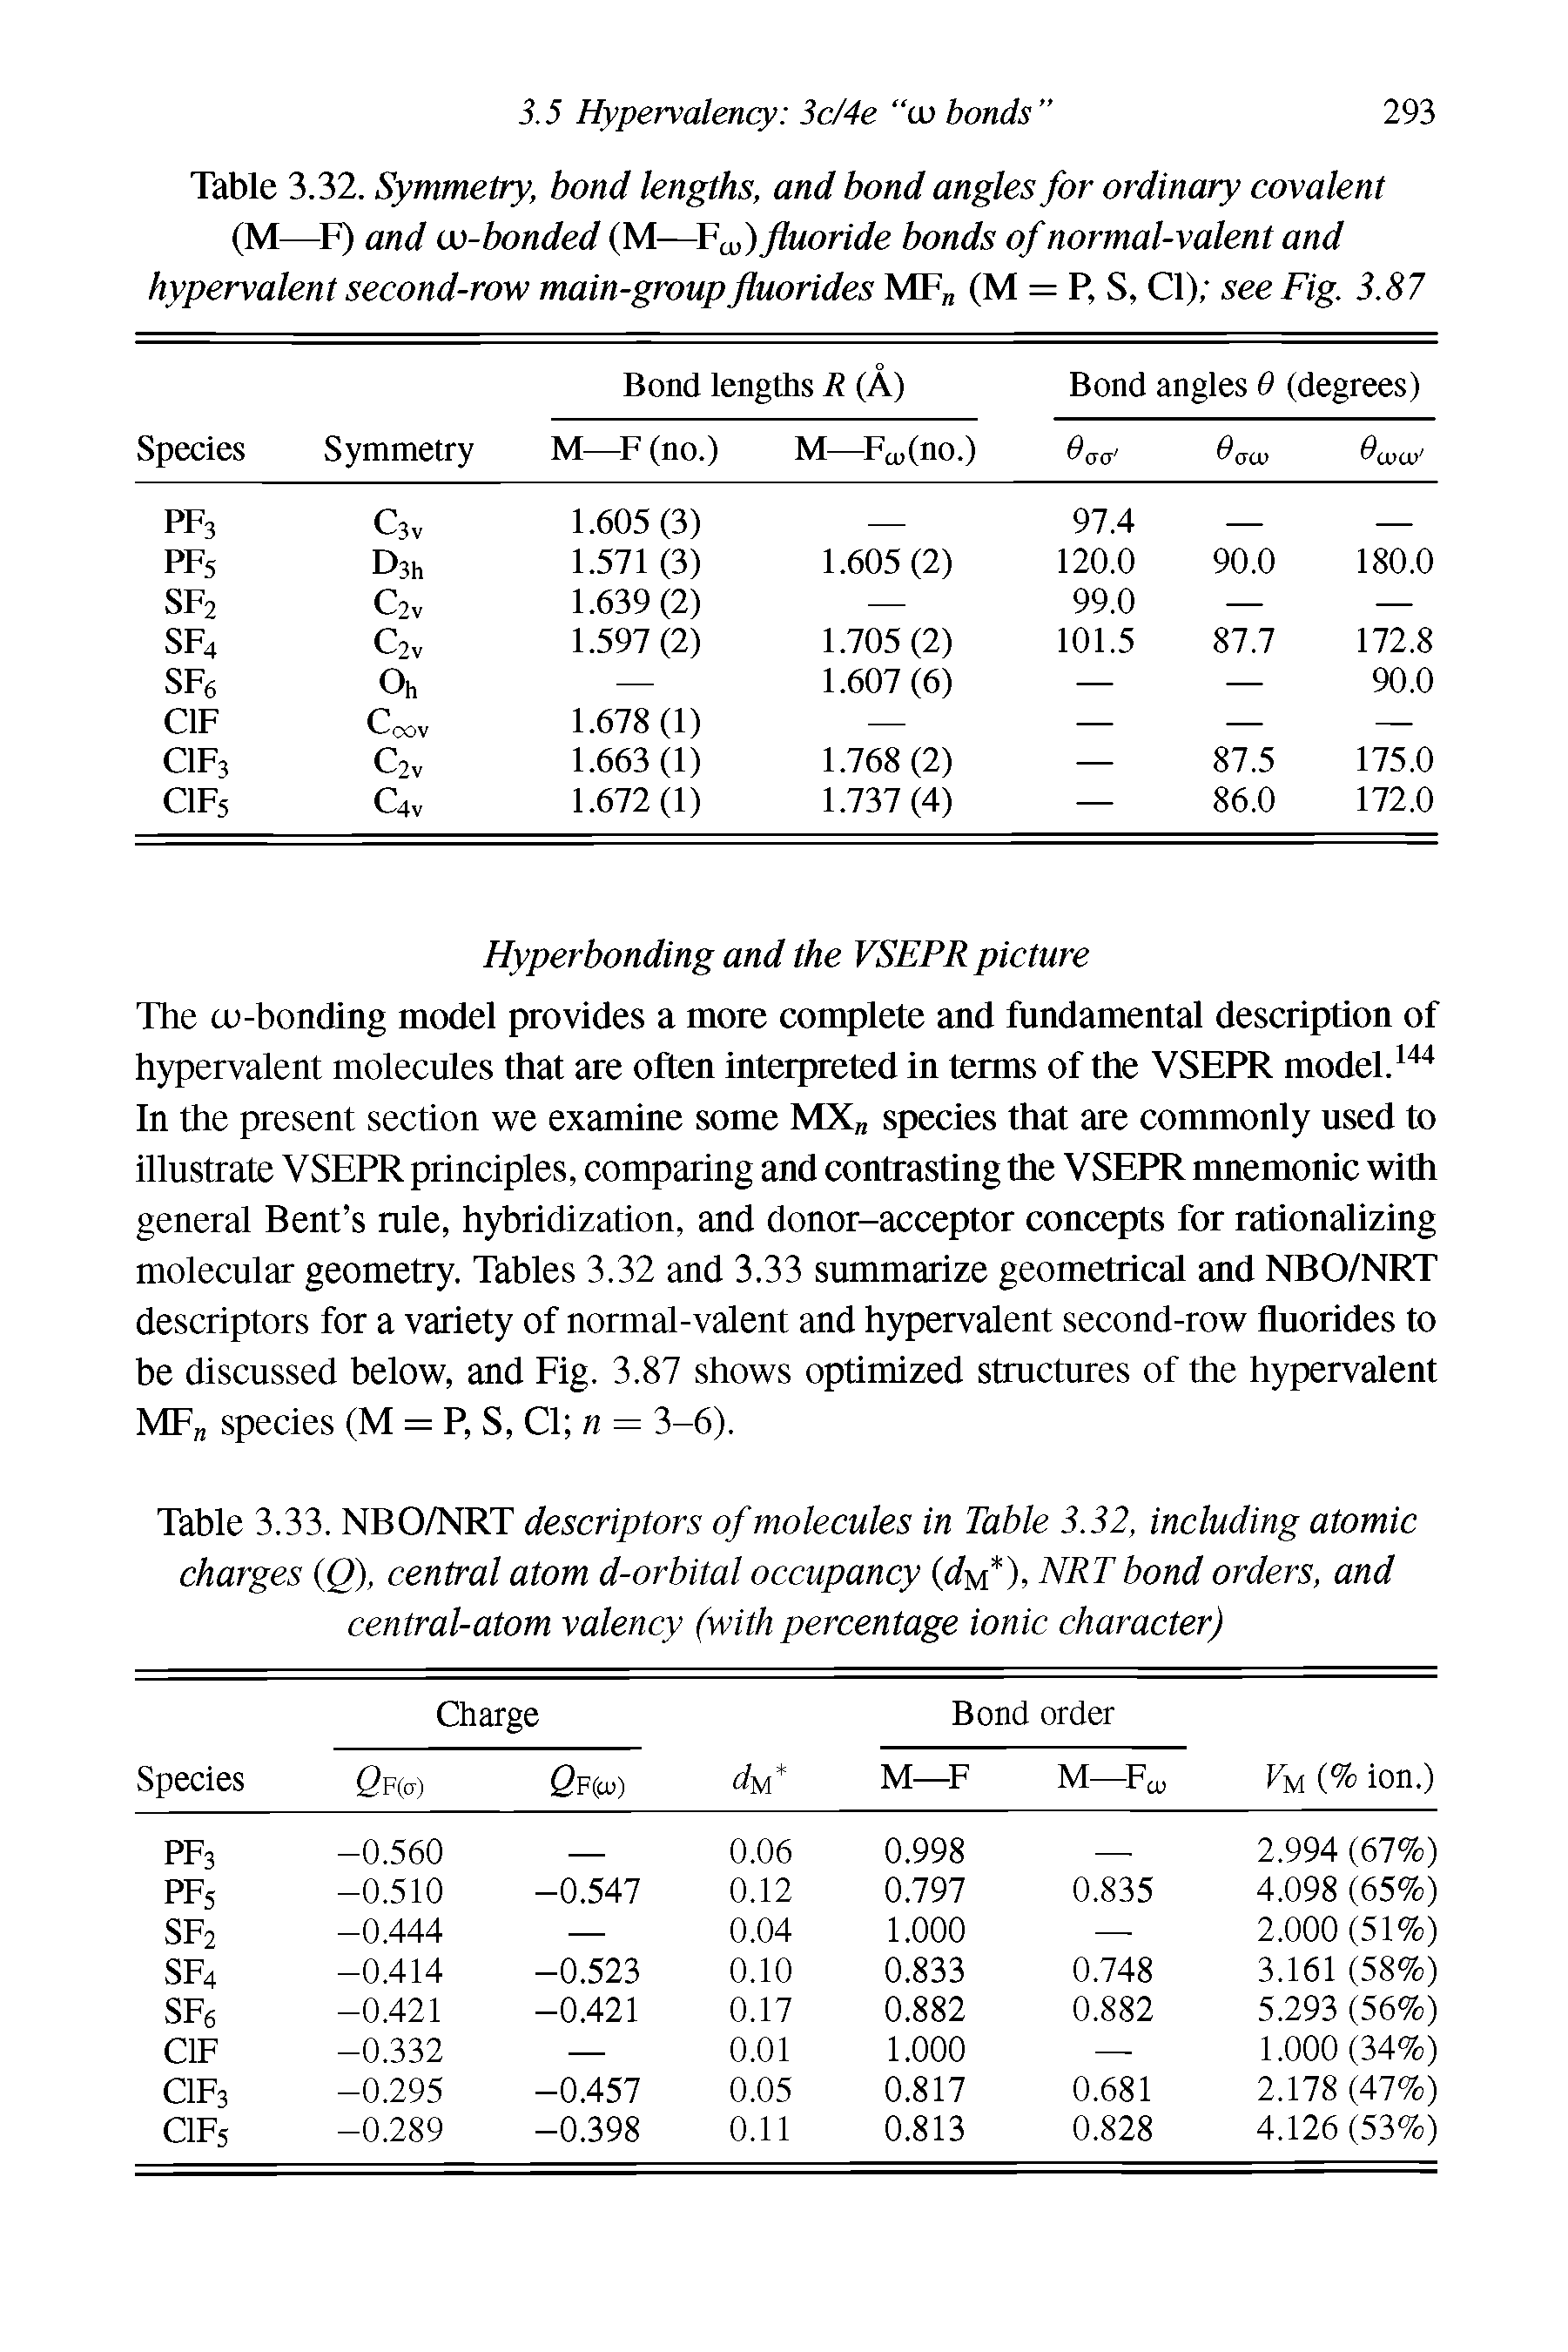 Table 3.33. NBO/NRT descriptors of molecules in Table 3.32, including atomic charges (Q), central atom d-orbital occupancy (c/m )> NRT bond orders, and central-atom valency (with percentage ionic character)...